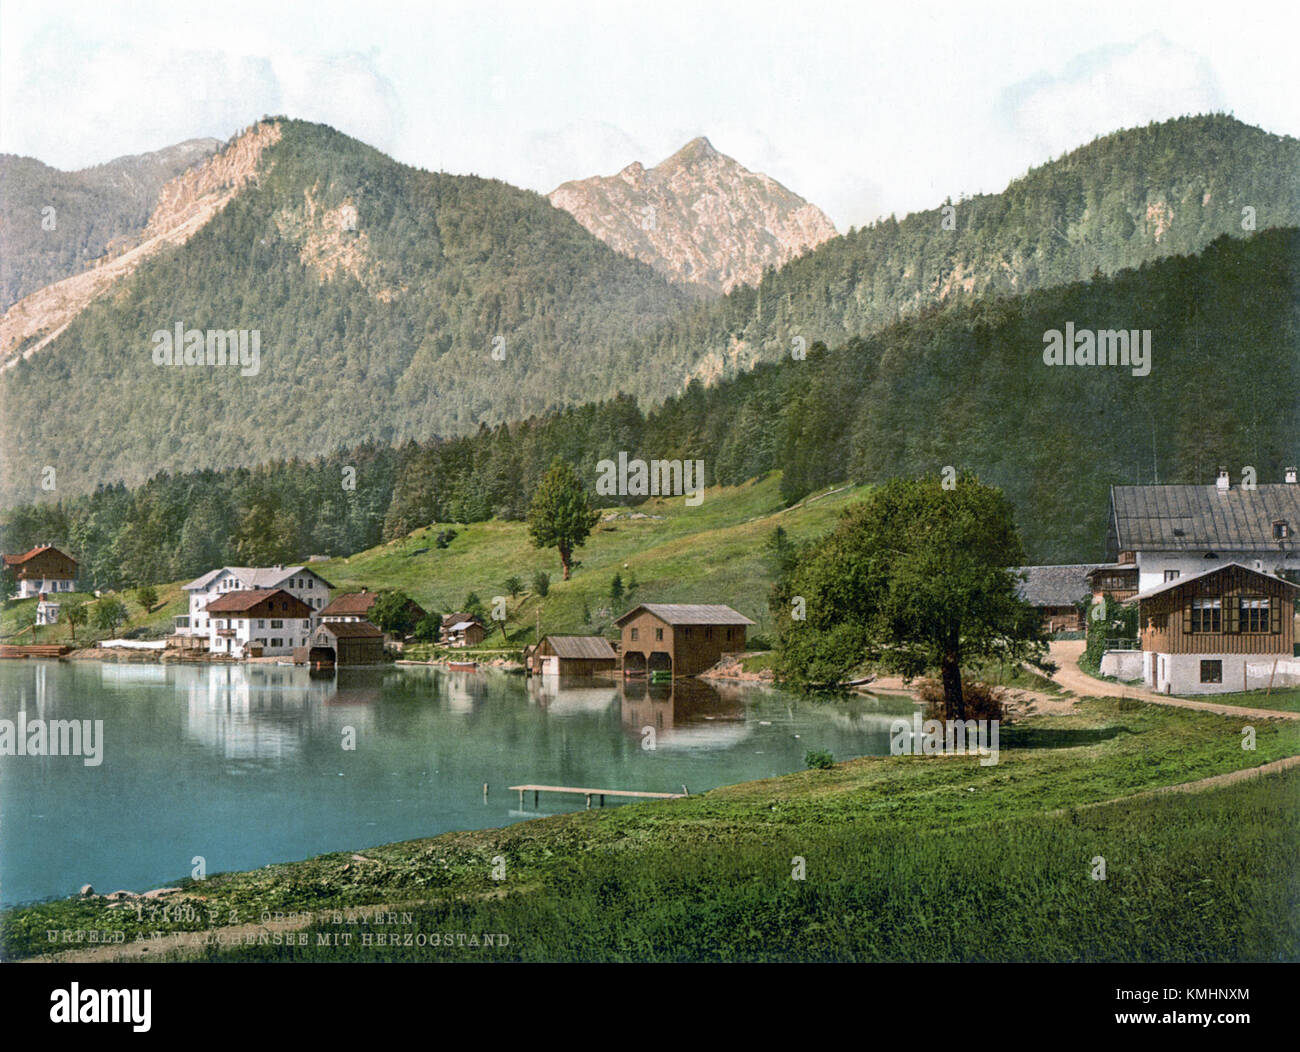 Urfeld High Resolution Stock Photography and Images - Alamy